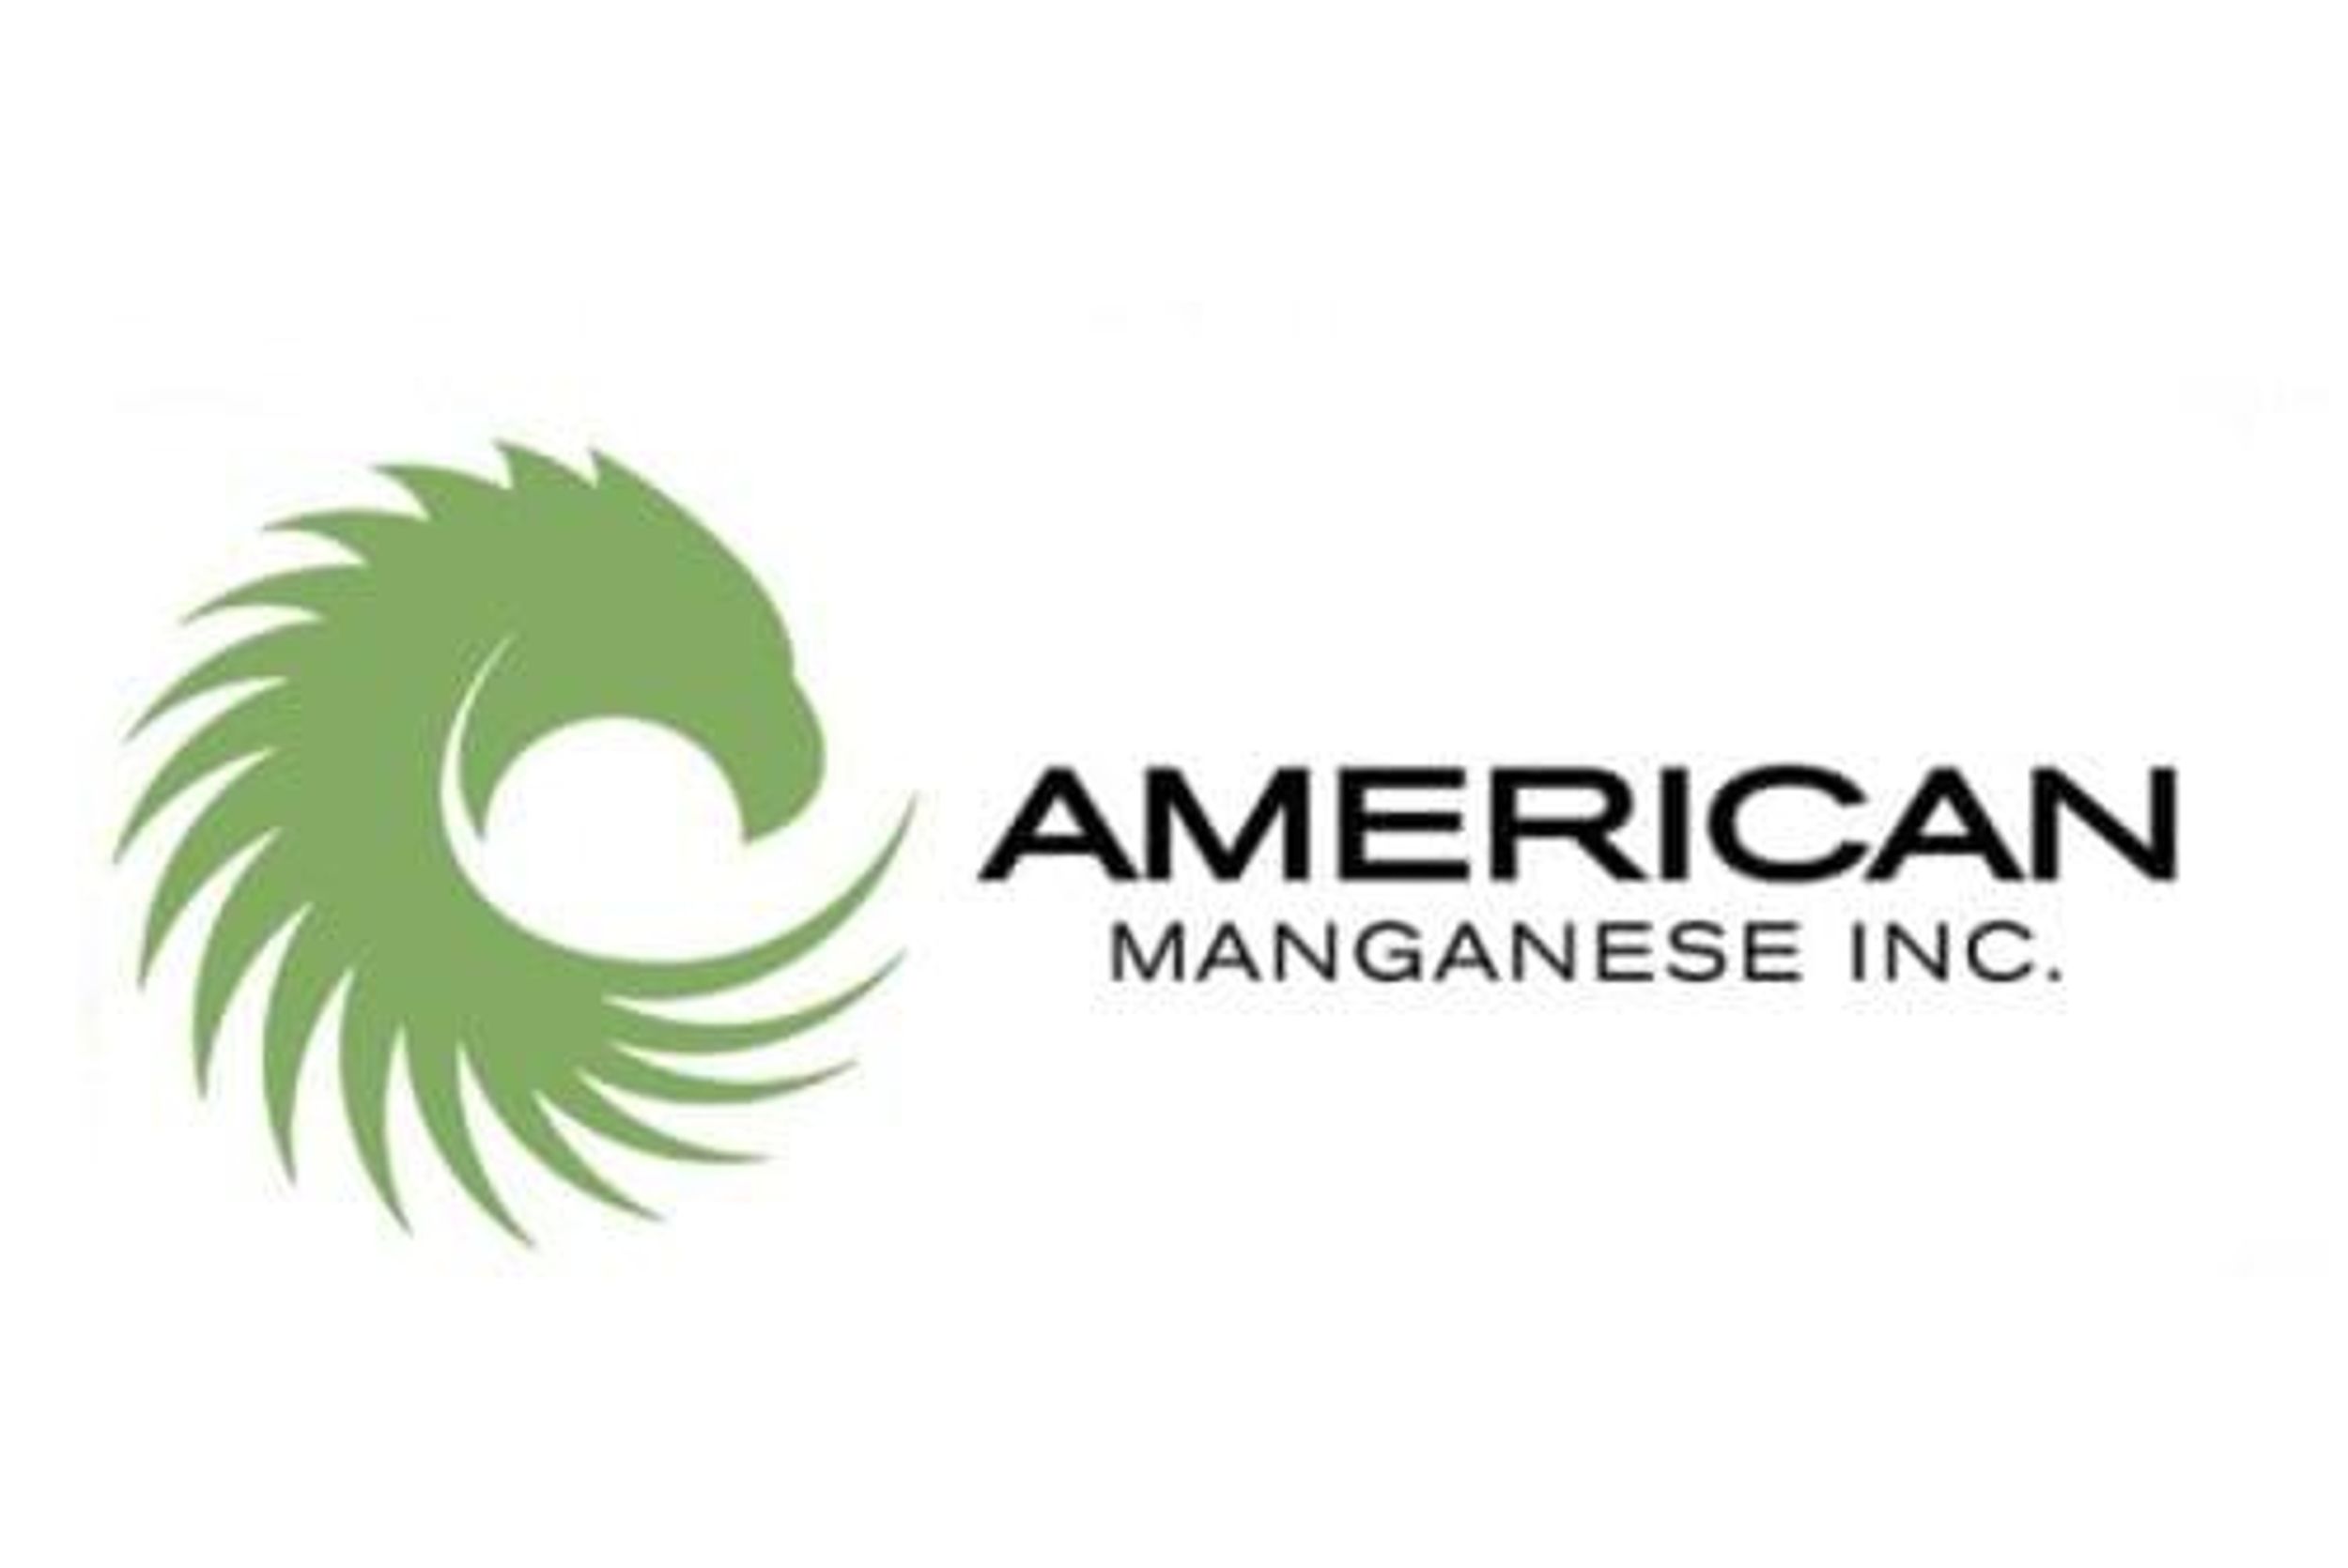 American Manganese Receives Preliminary Results of Environmental Impact Study for Lithium-ion Battery Recycling Process